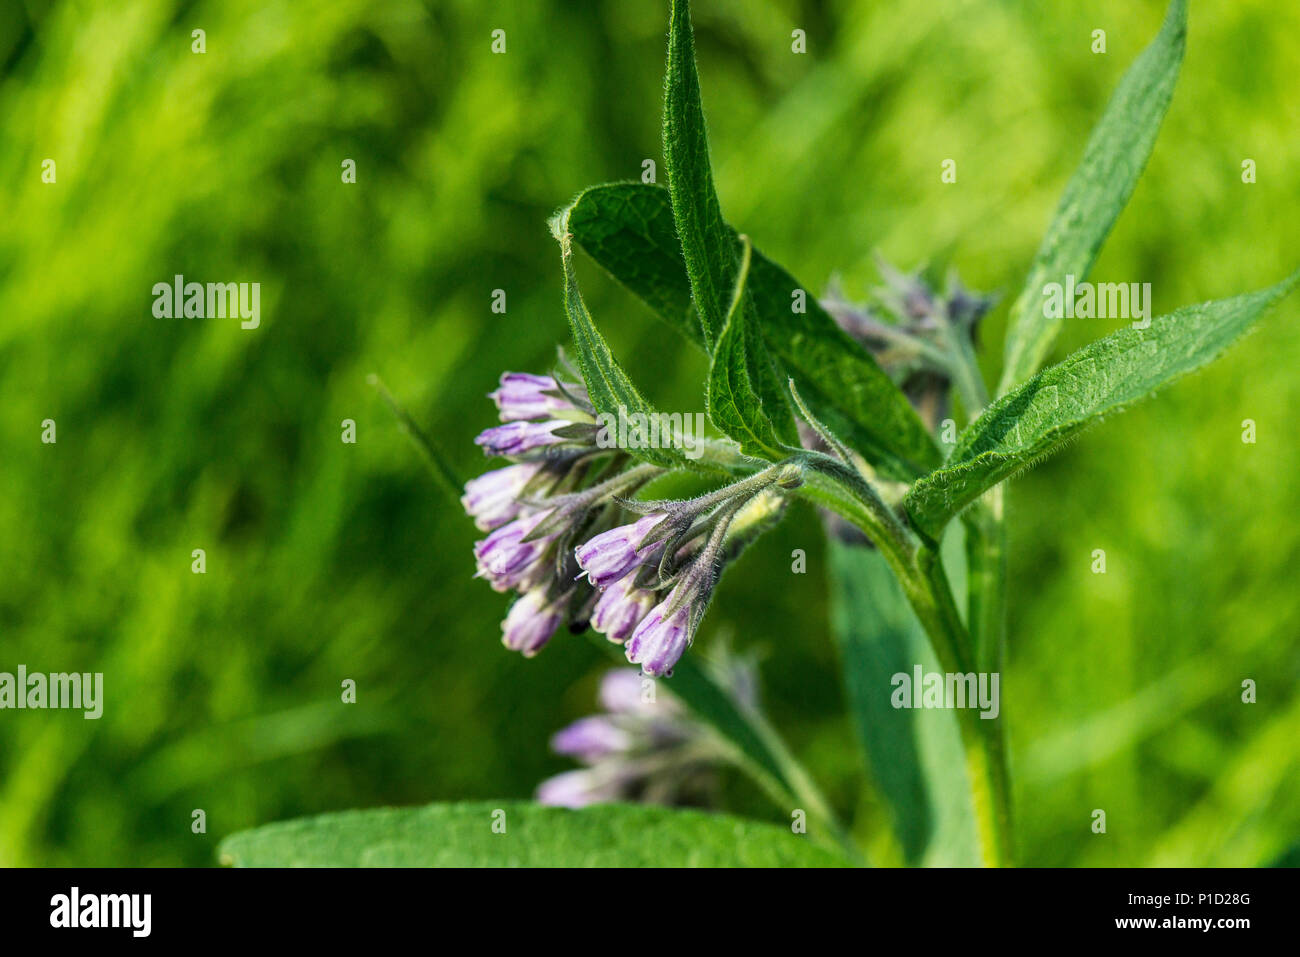 The flower of a comfrey plant Stock Photo